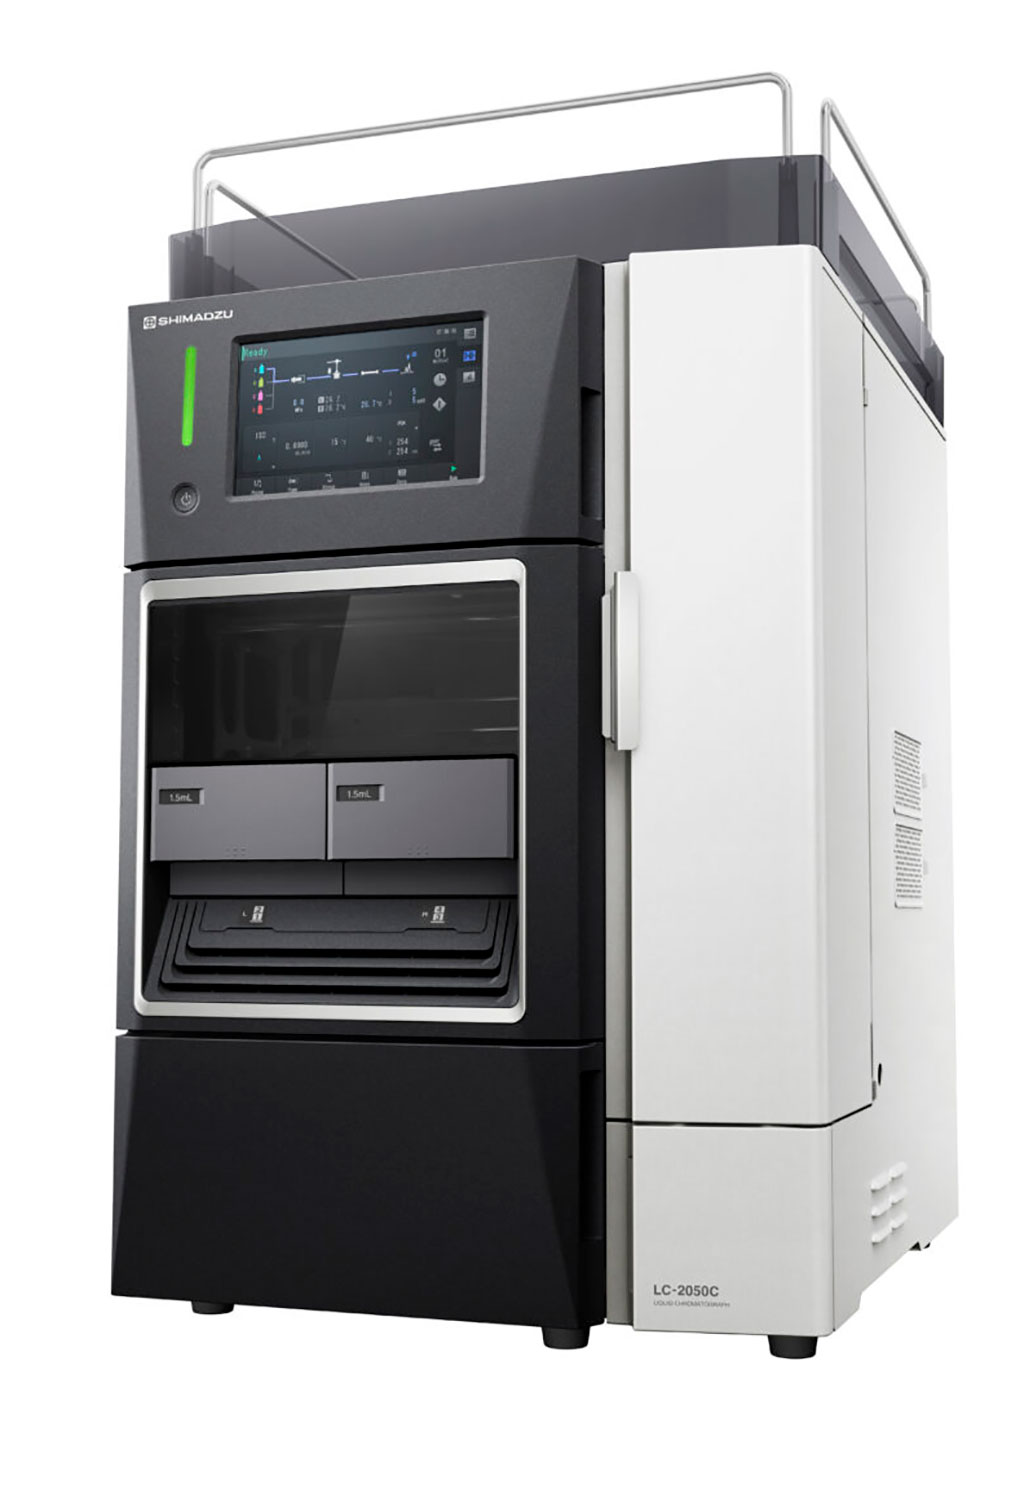 Image: The HPLC model: LC-2050 series, three types of detector setup (UV, PDA, detector-less) are available to suit any analysis methods and aims (Photo courtesy of Shimadzu)